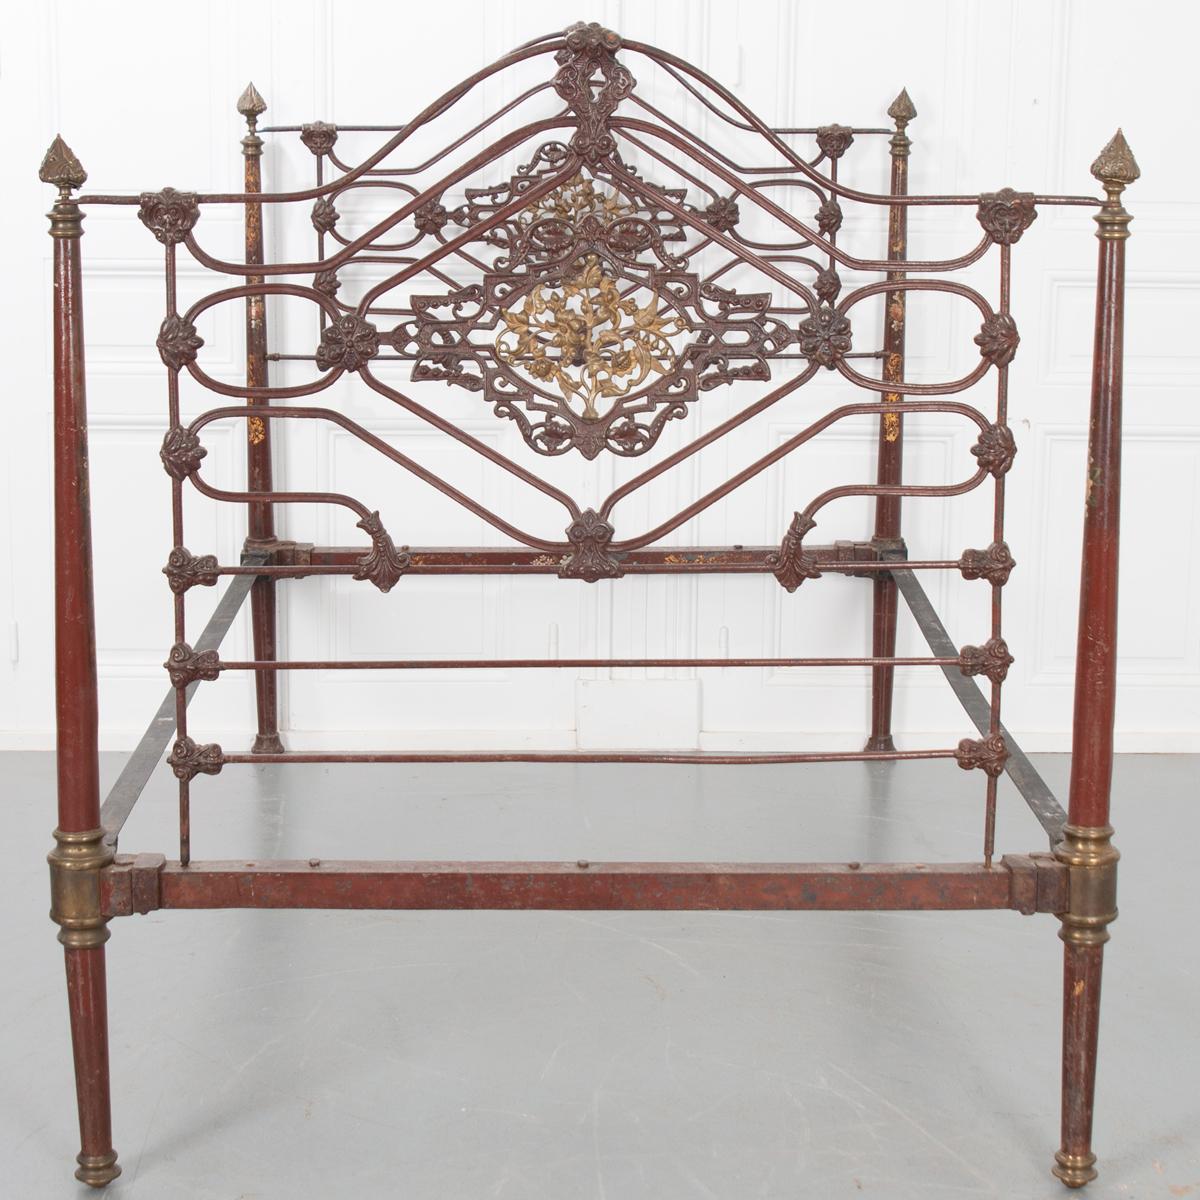 Brass finials adorn the four posts of this vintage French iron and brass bed. The finials are quite fragile as one is broken. The metal bed has remnants of red paint with accents of brass. The center of the headboard and footboard have brass floral